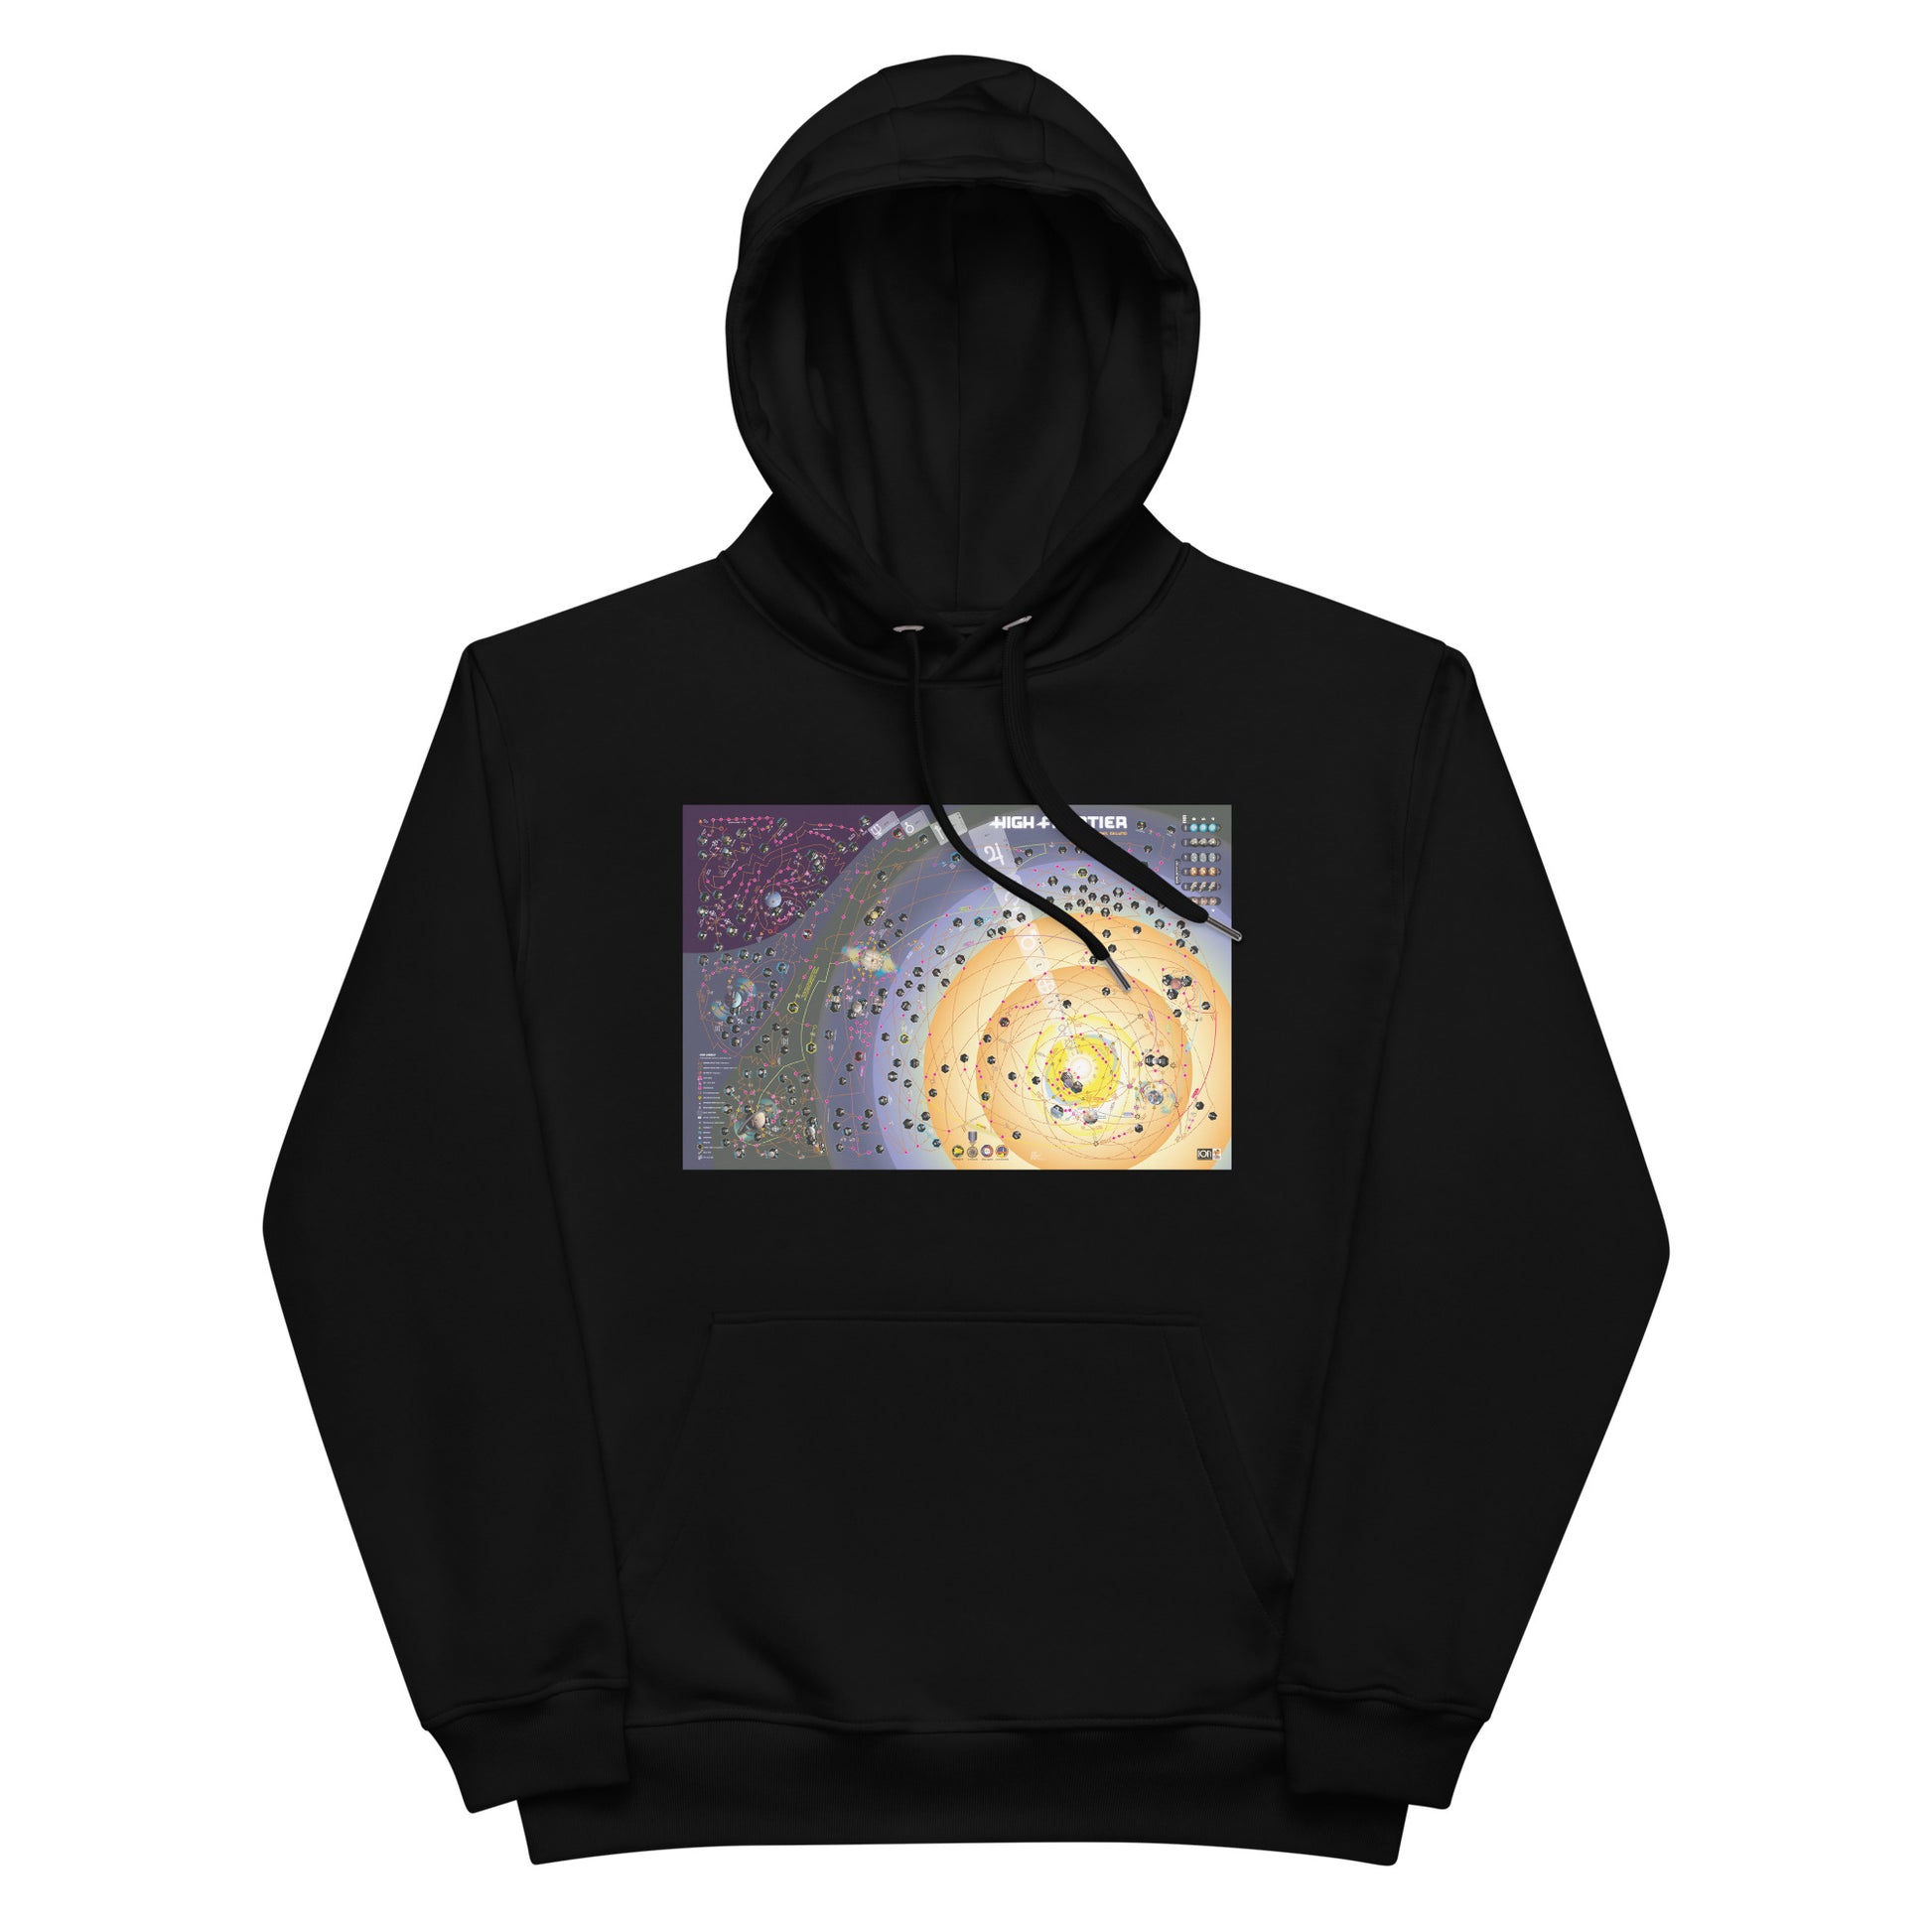 High Frontier 4 All Map Premium ECO Hoodie - Black version of the hoodie displayed. Embellished with the board design from ION's popular board game, High Frontier 4 All